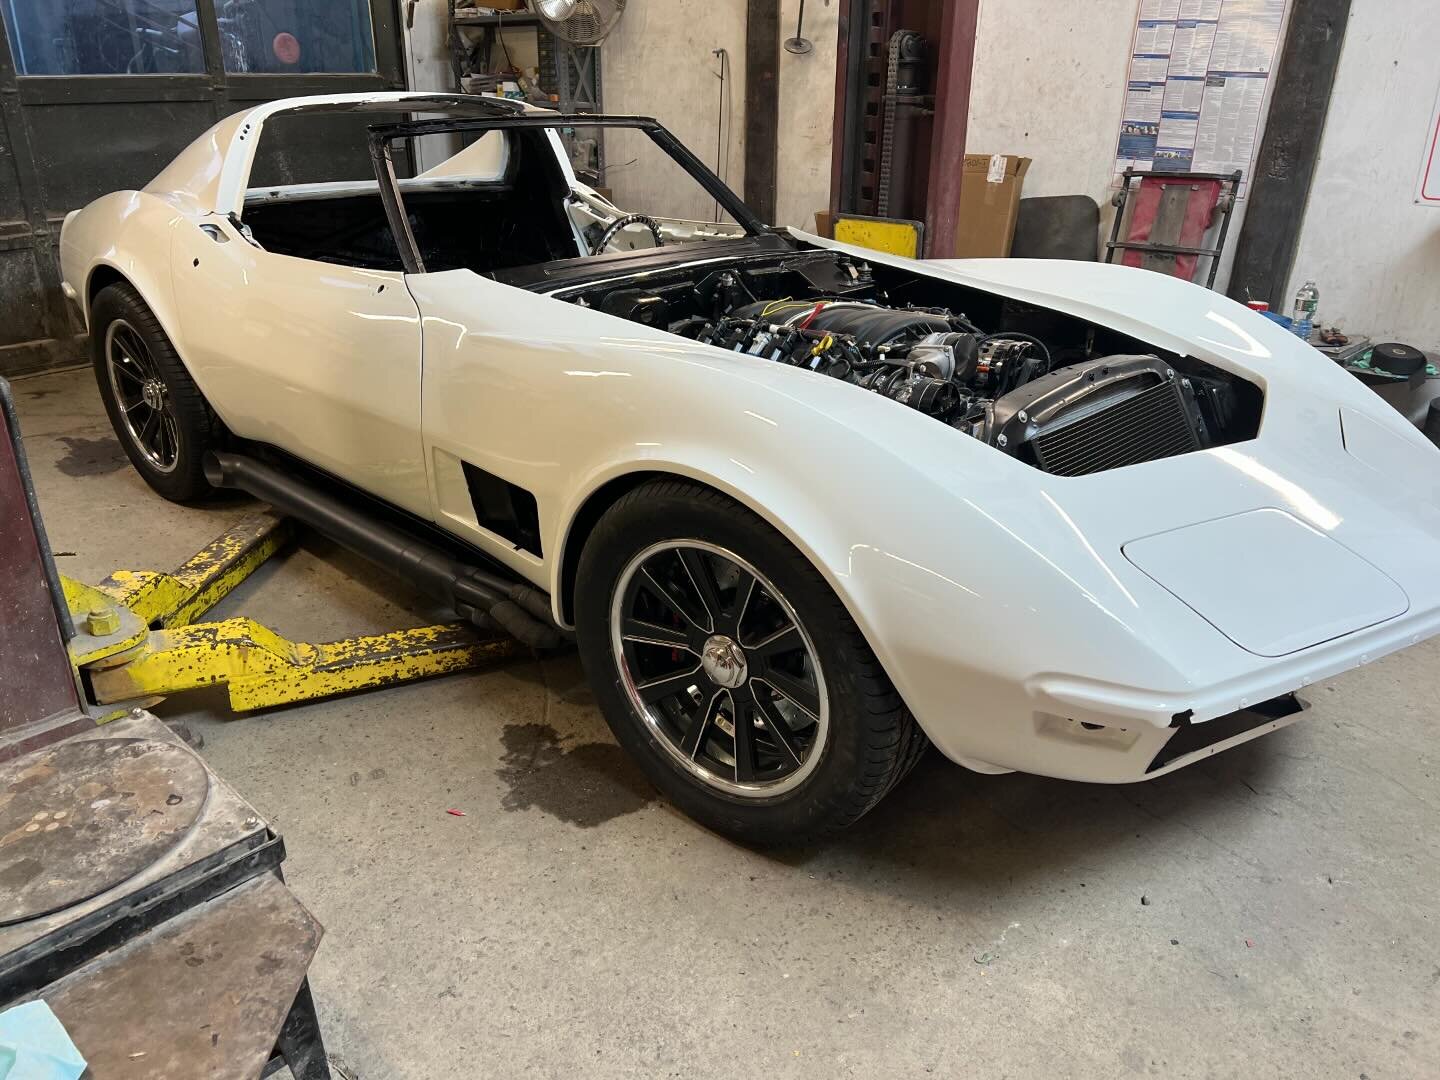 1972 Corvette Restomod RT rocker panel in place. The rear removable window frame painted black with mat clear matching all trim on car.#longvalleyautobody #1972corvette